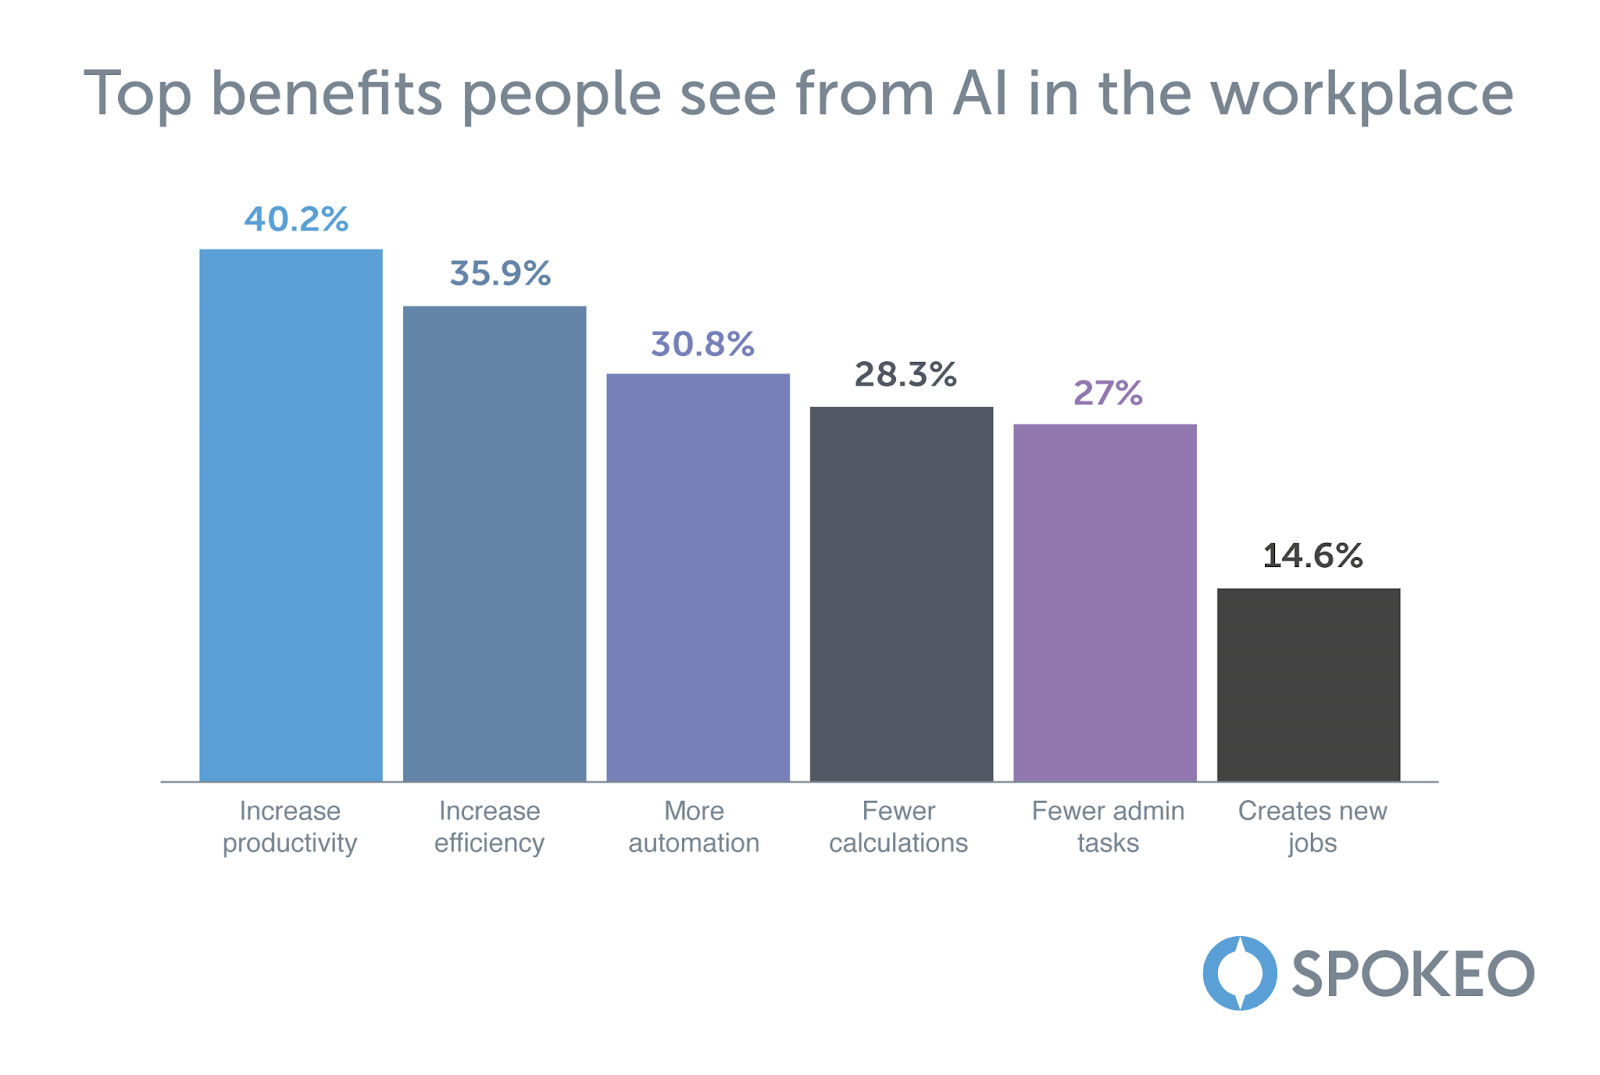 Image of a graph showing the top benefits people see from AI in the workplace.